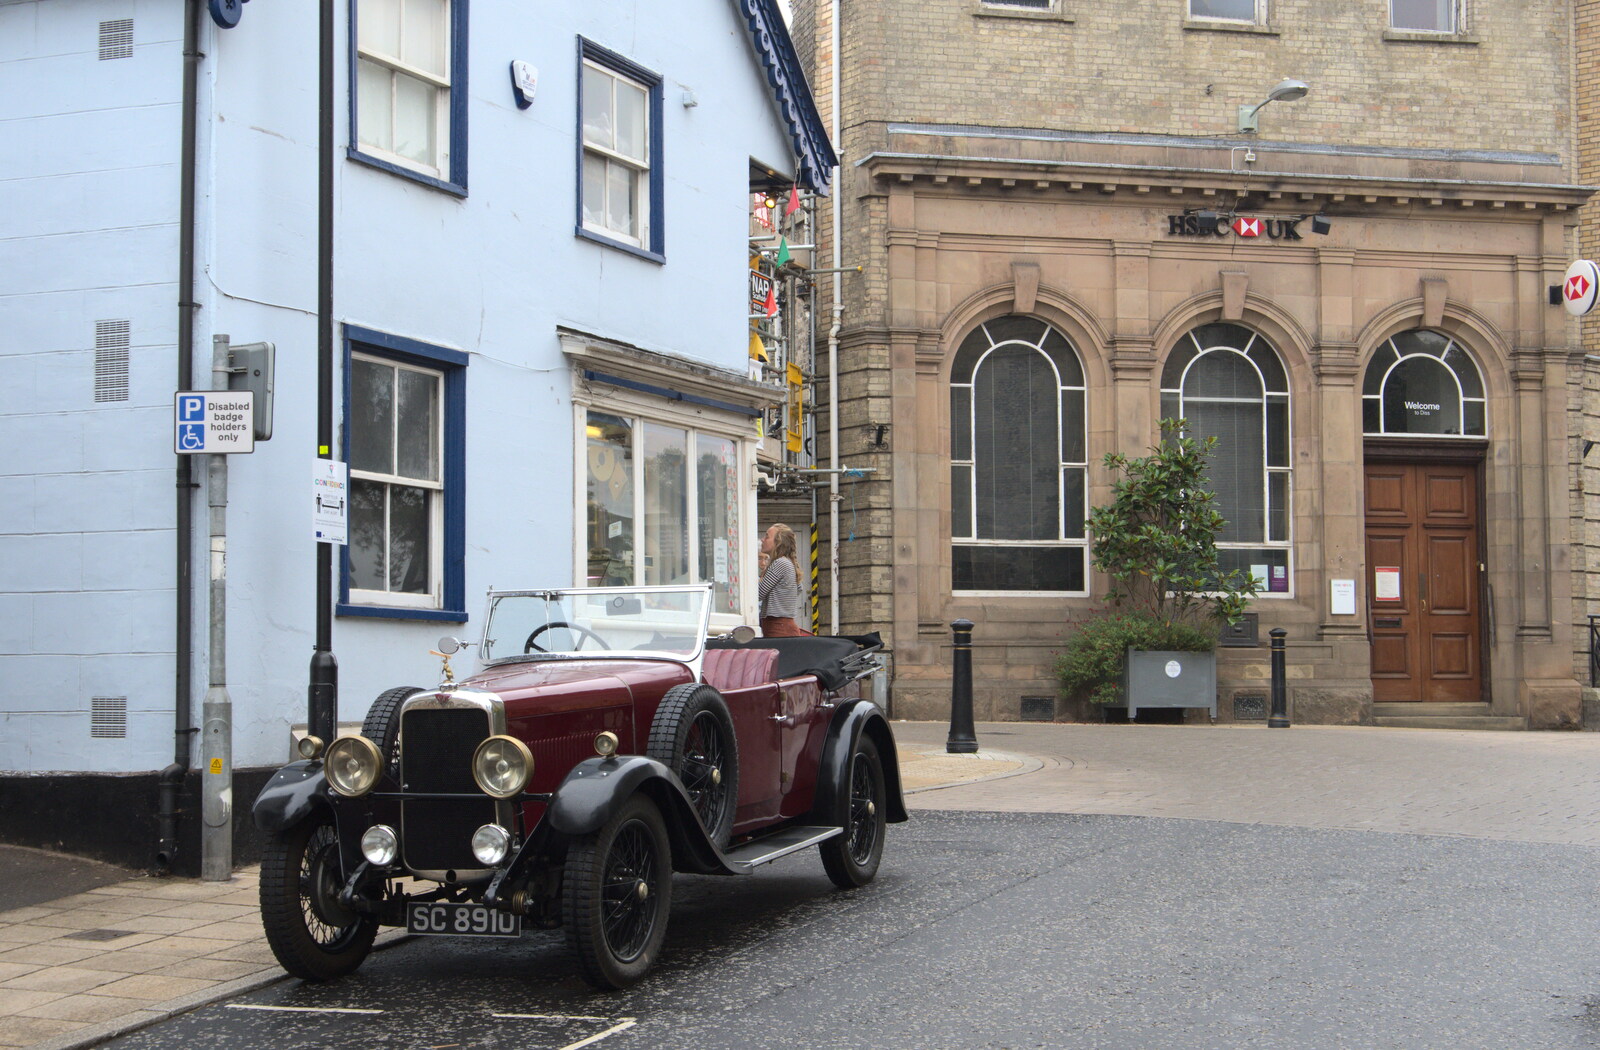 There's a nice old car outside Browne's in Diss from Jules Visits, and a Trip to Tyrrel's Wood, Pulham Market, Norfolk - 16th August 2020